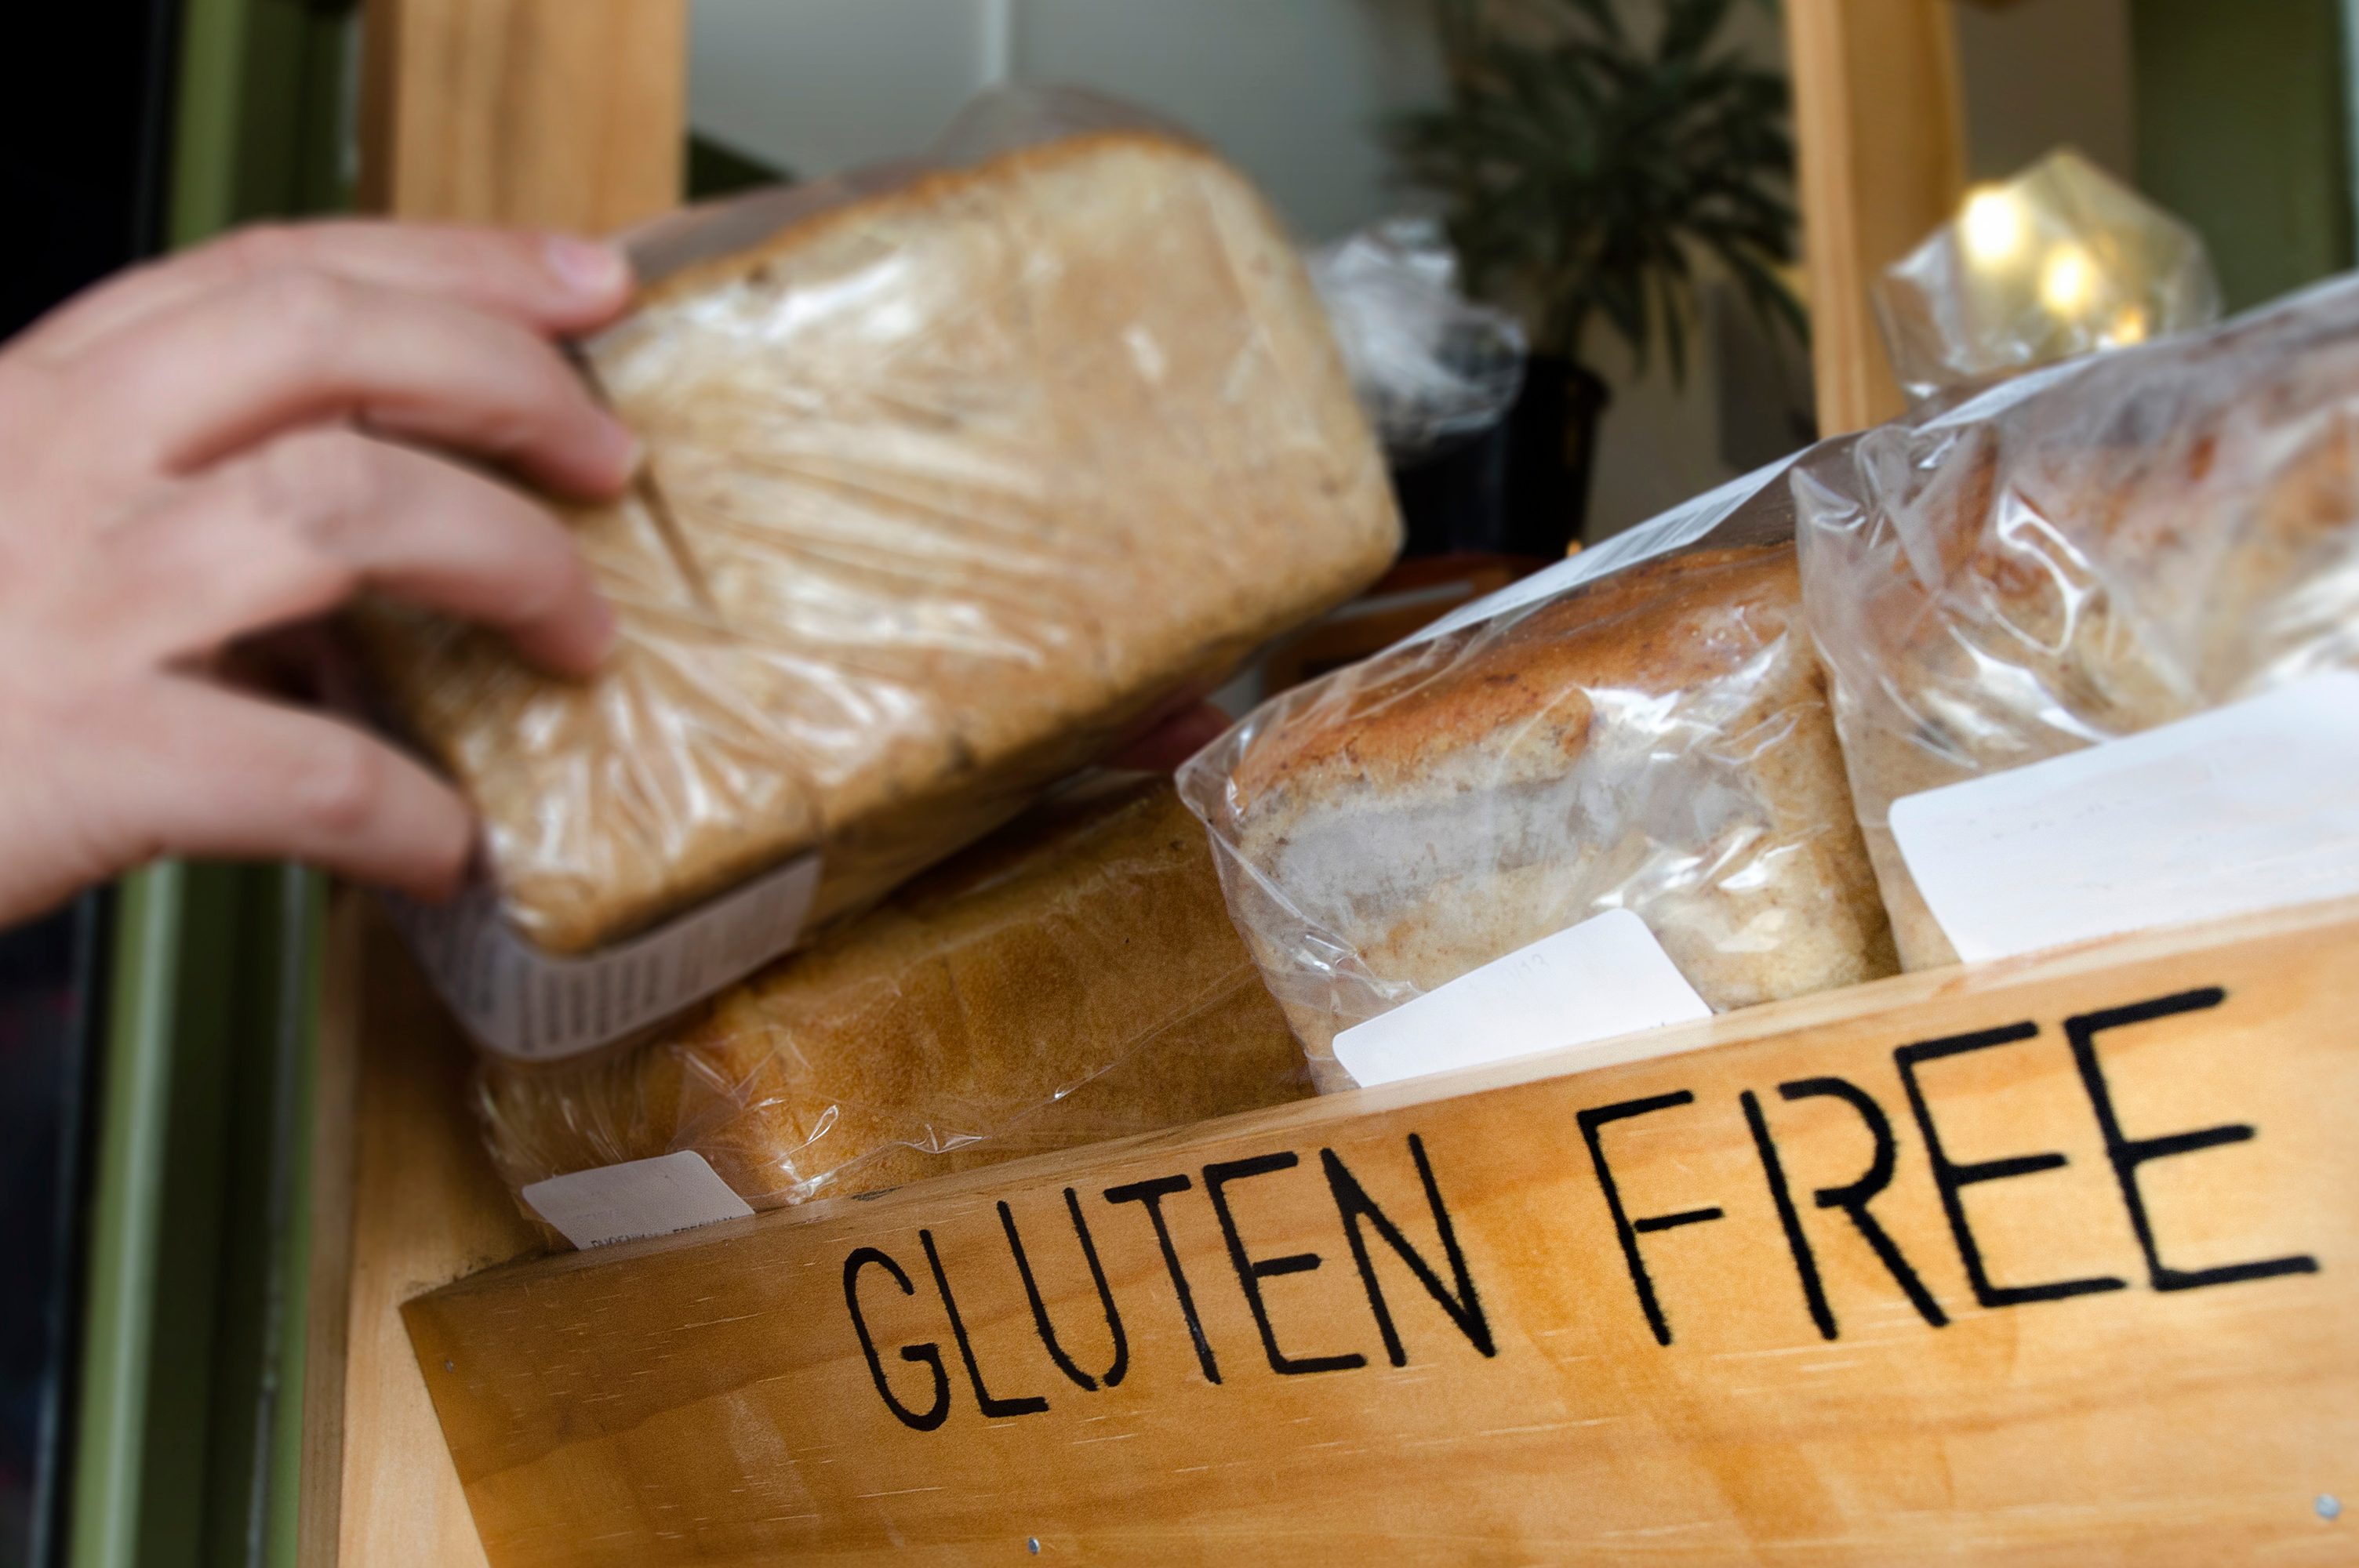  Celiac Disease 20 Things to Know About Gluten - Free Diets The Healthy